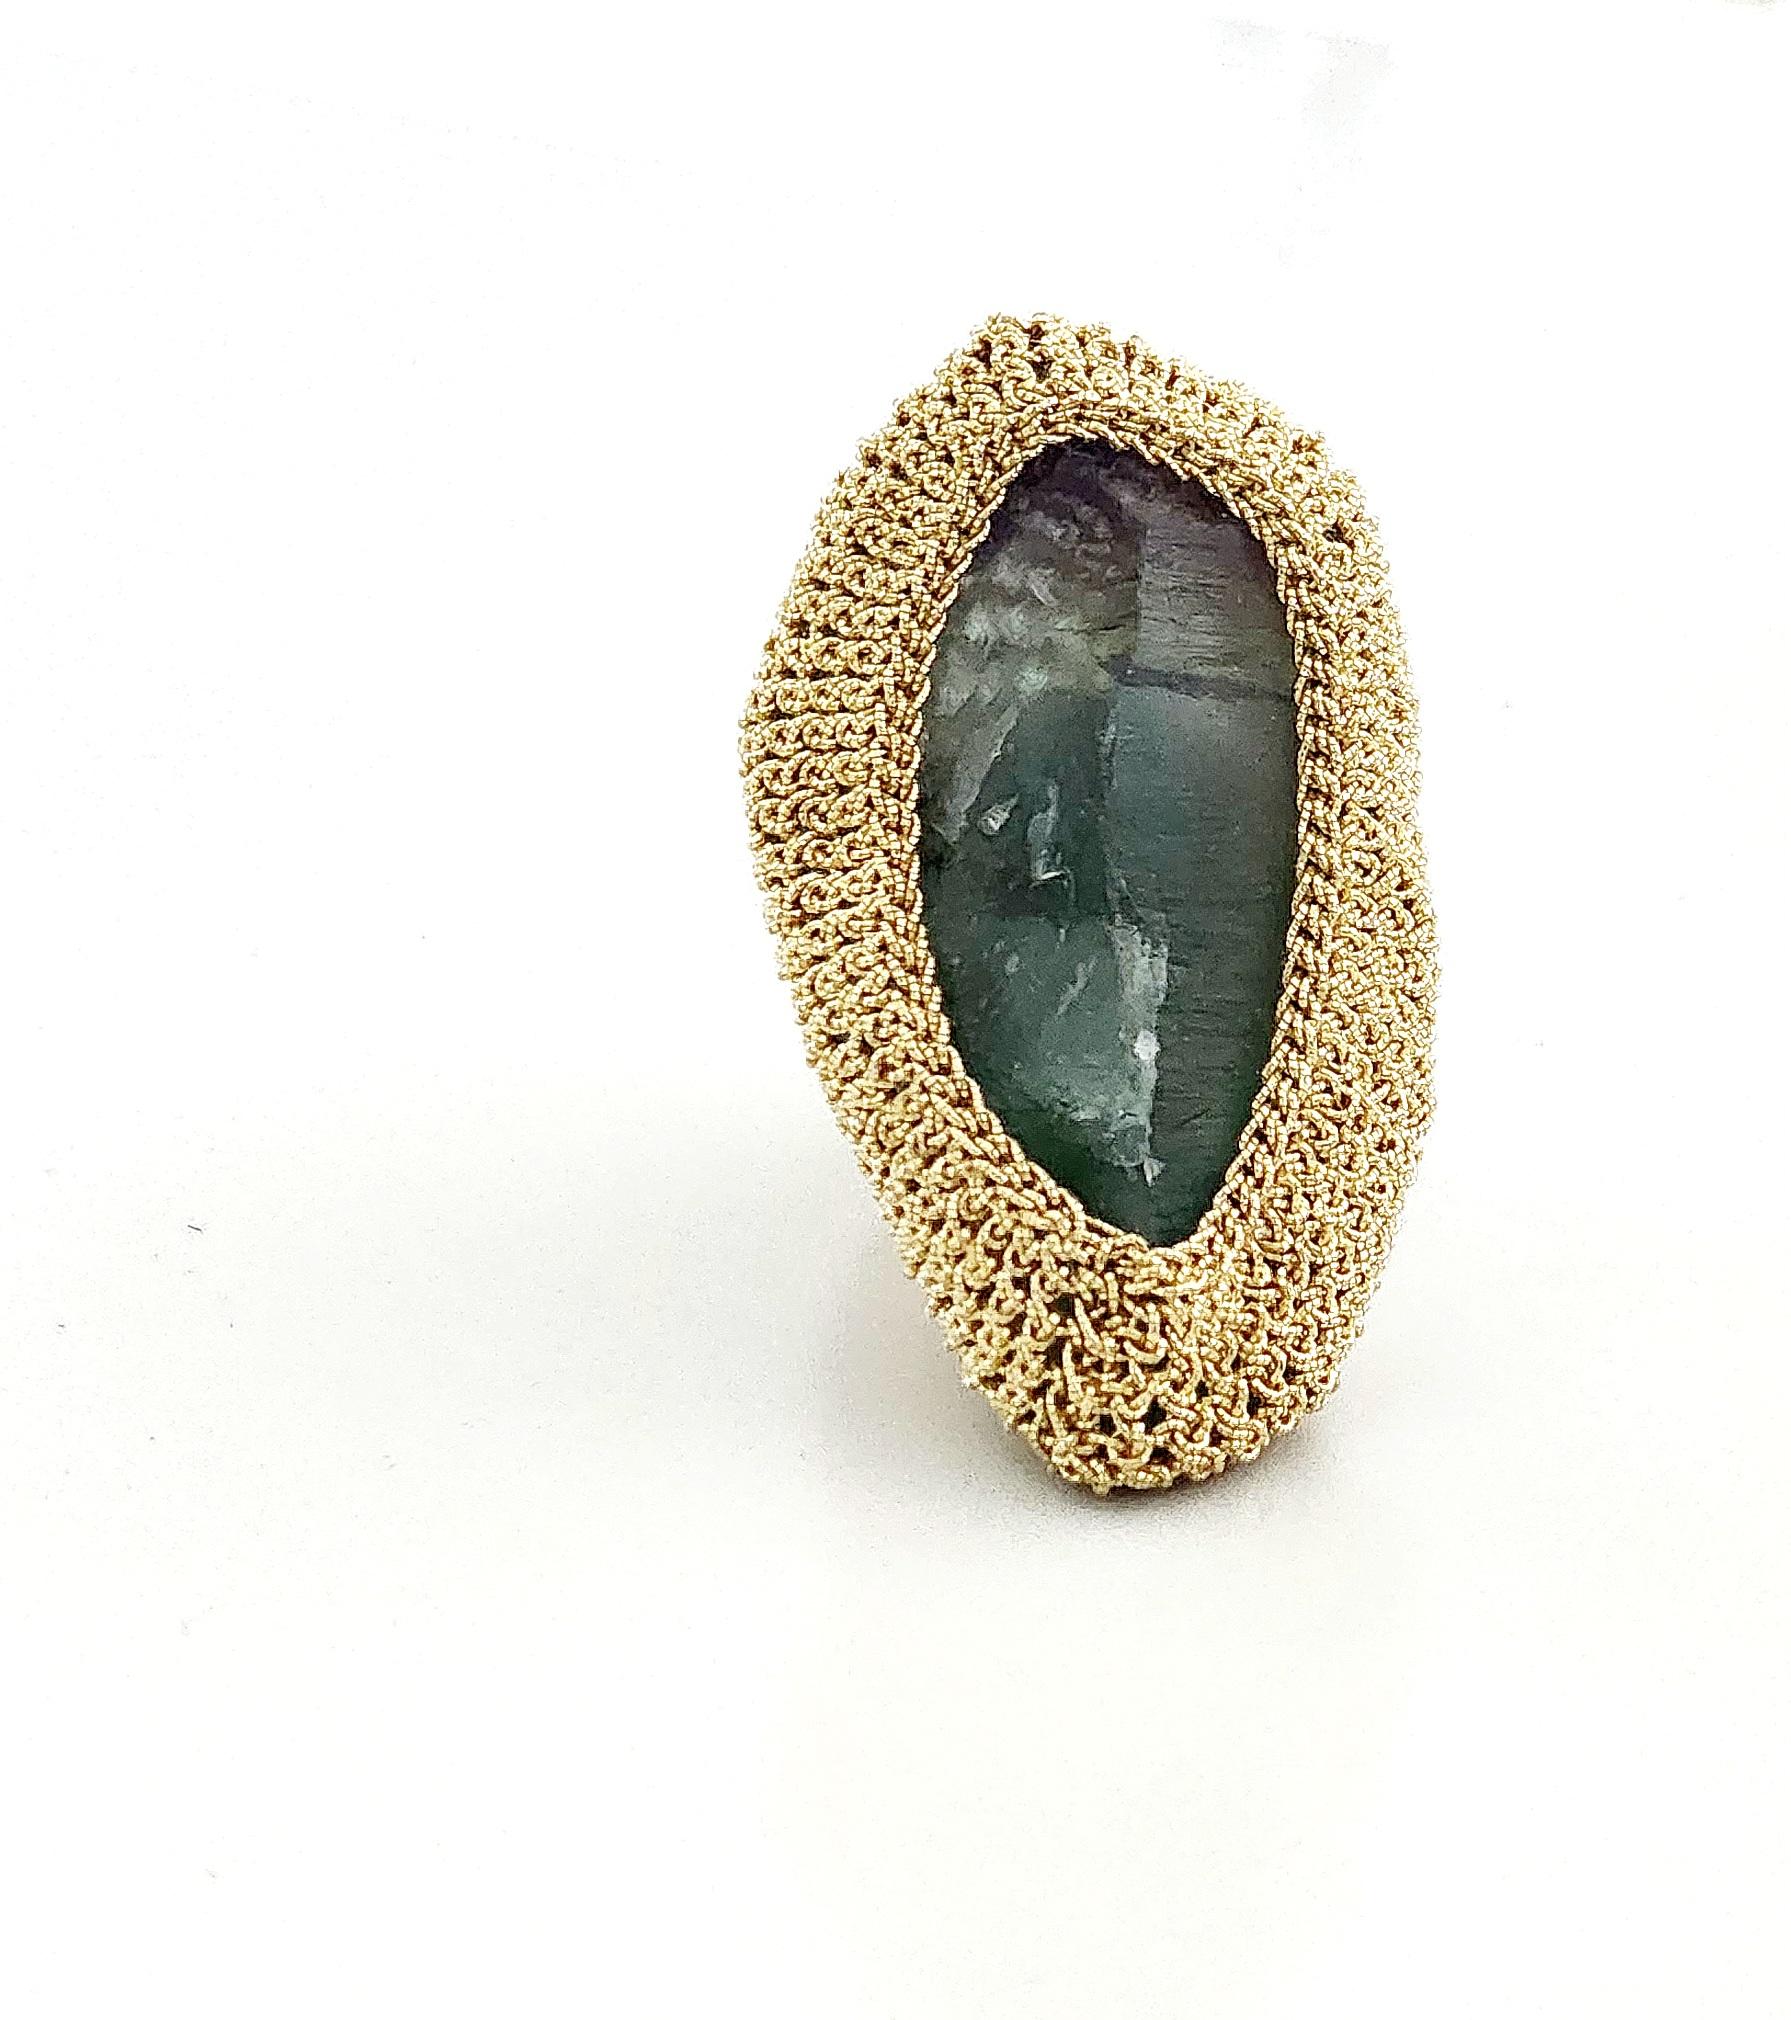 Beautiful, one of a kind crochet ring. It is meticulously handcrafted with 18 karat gold thread. The thread is made of an 18 karat gold wire which is flattened and wrapped around a cotton core. The stone is a beautiful rough cut Fluorite.  